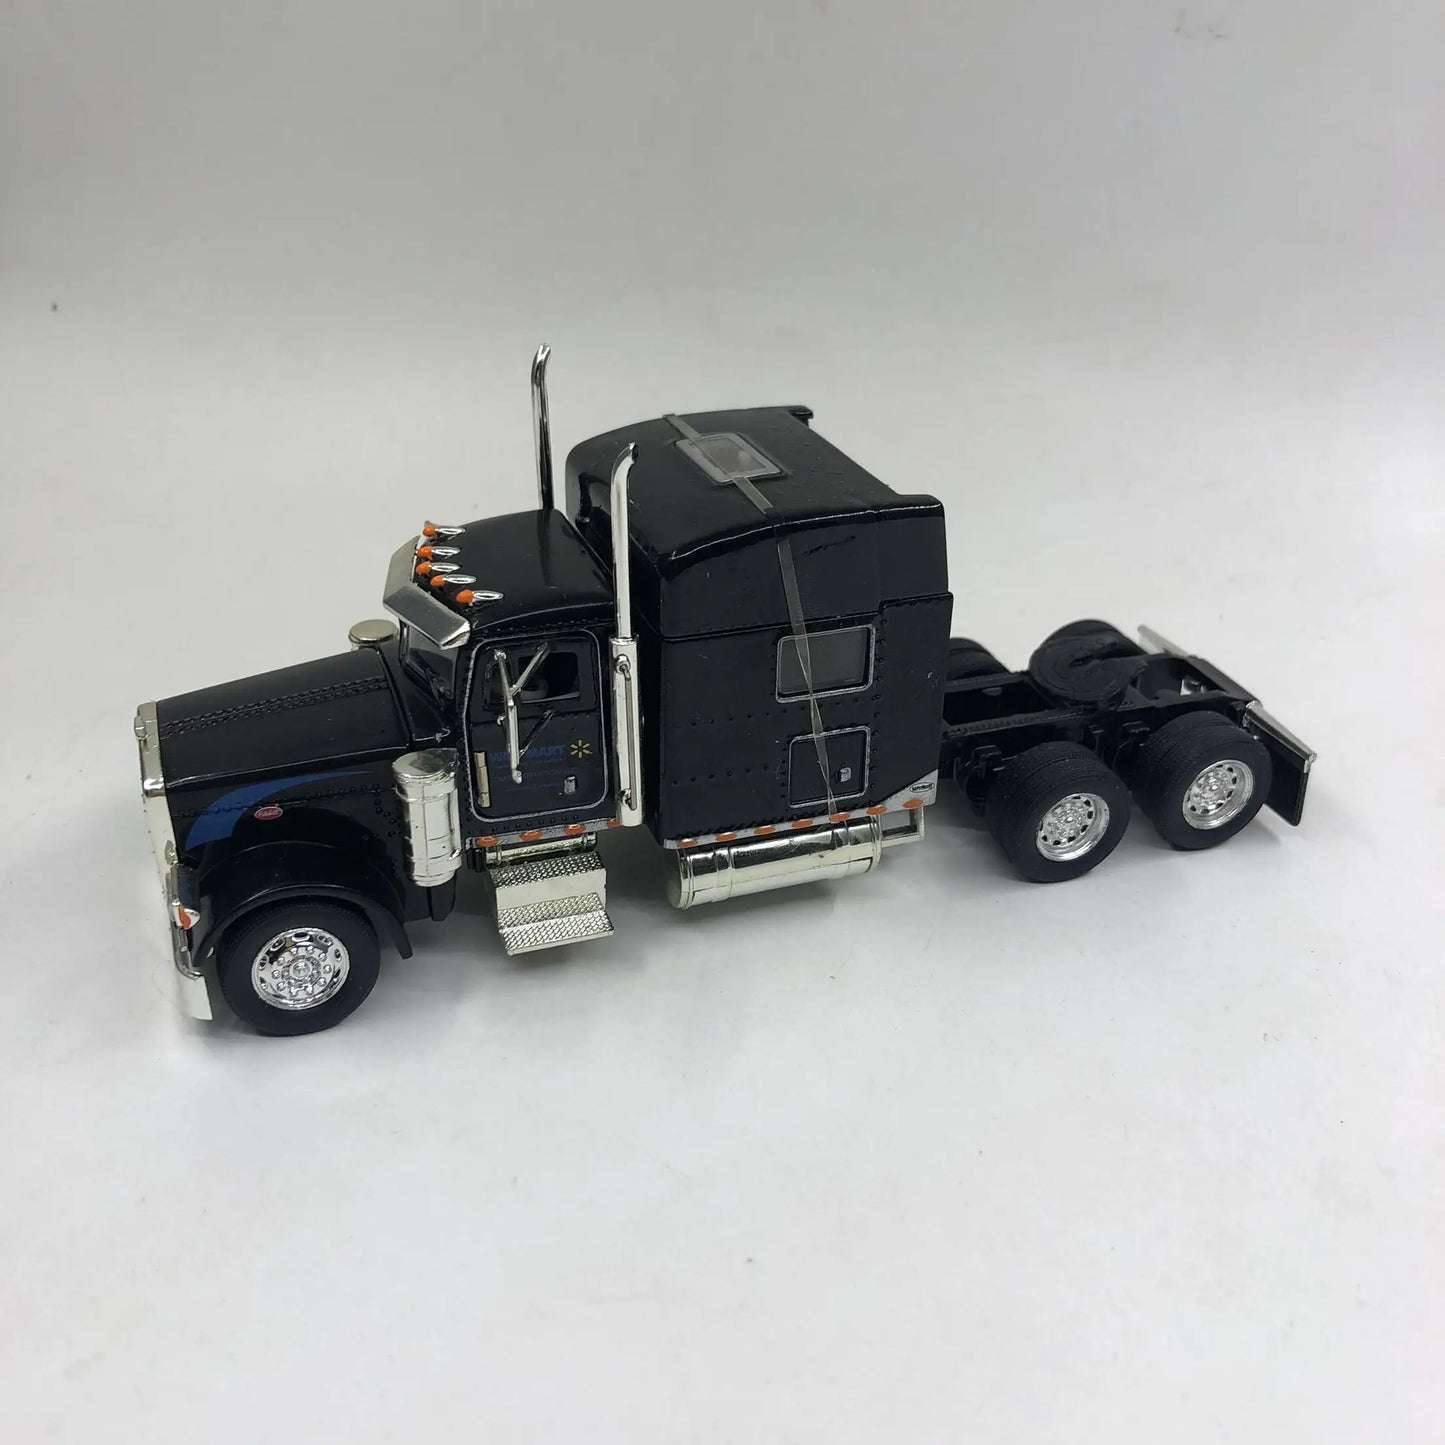 Peterbilt Container Truck Head 1:53 Scale Die-Cast Alloy Model - American Style, Perfect for Collectors, Display, and Vehicle Toy Enthusiasts!